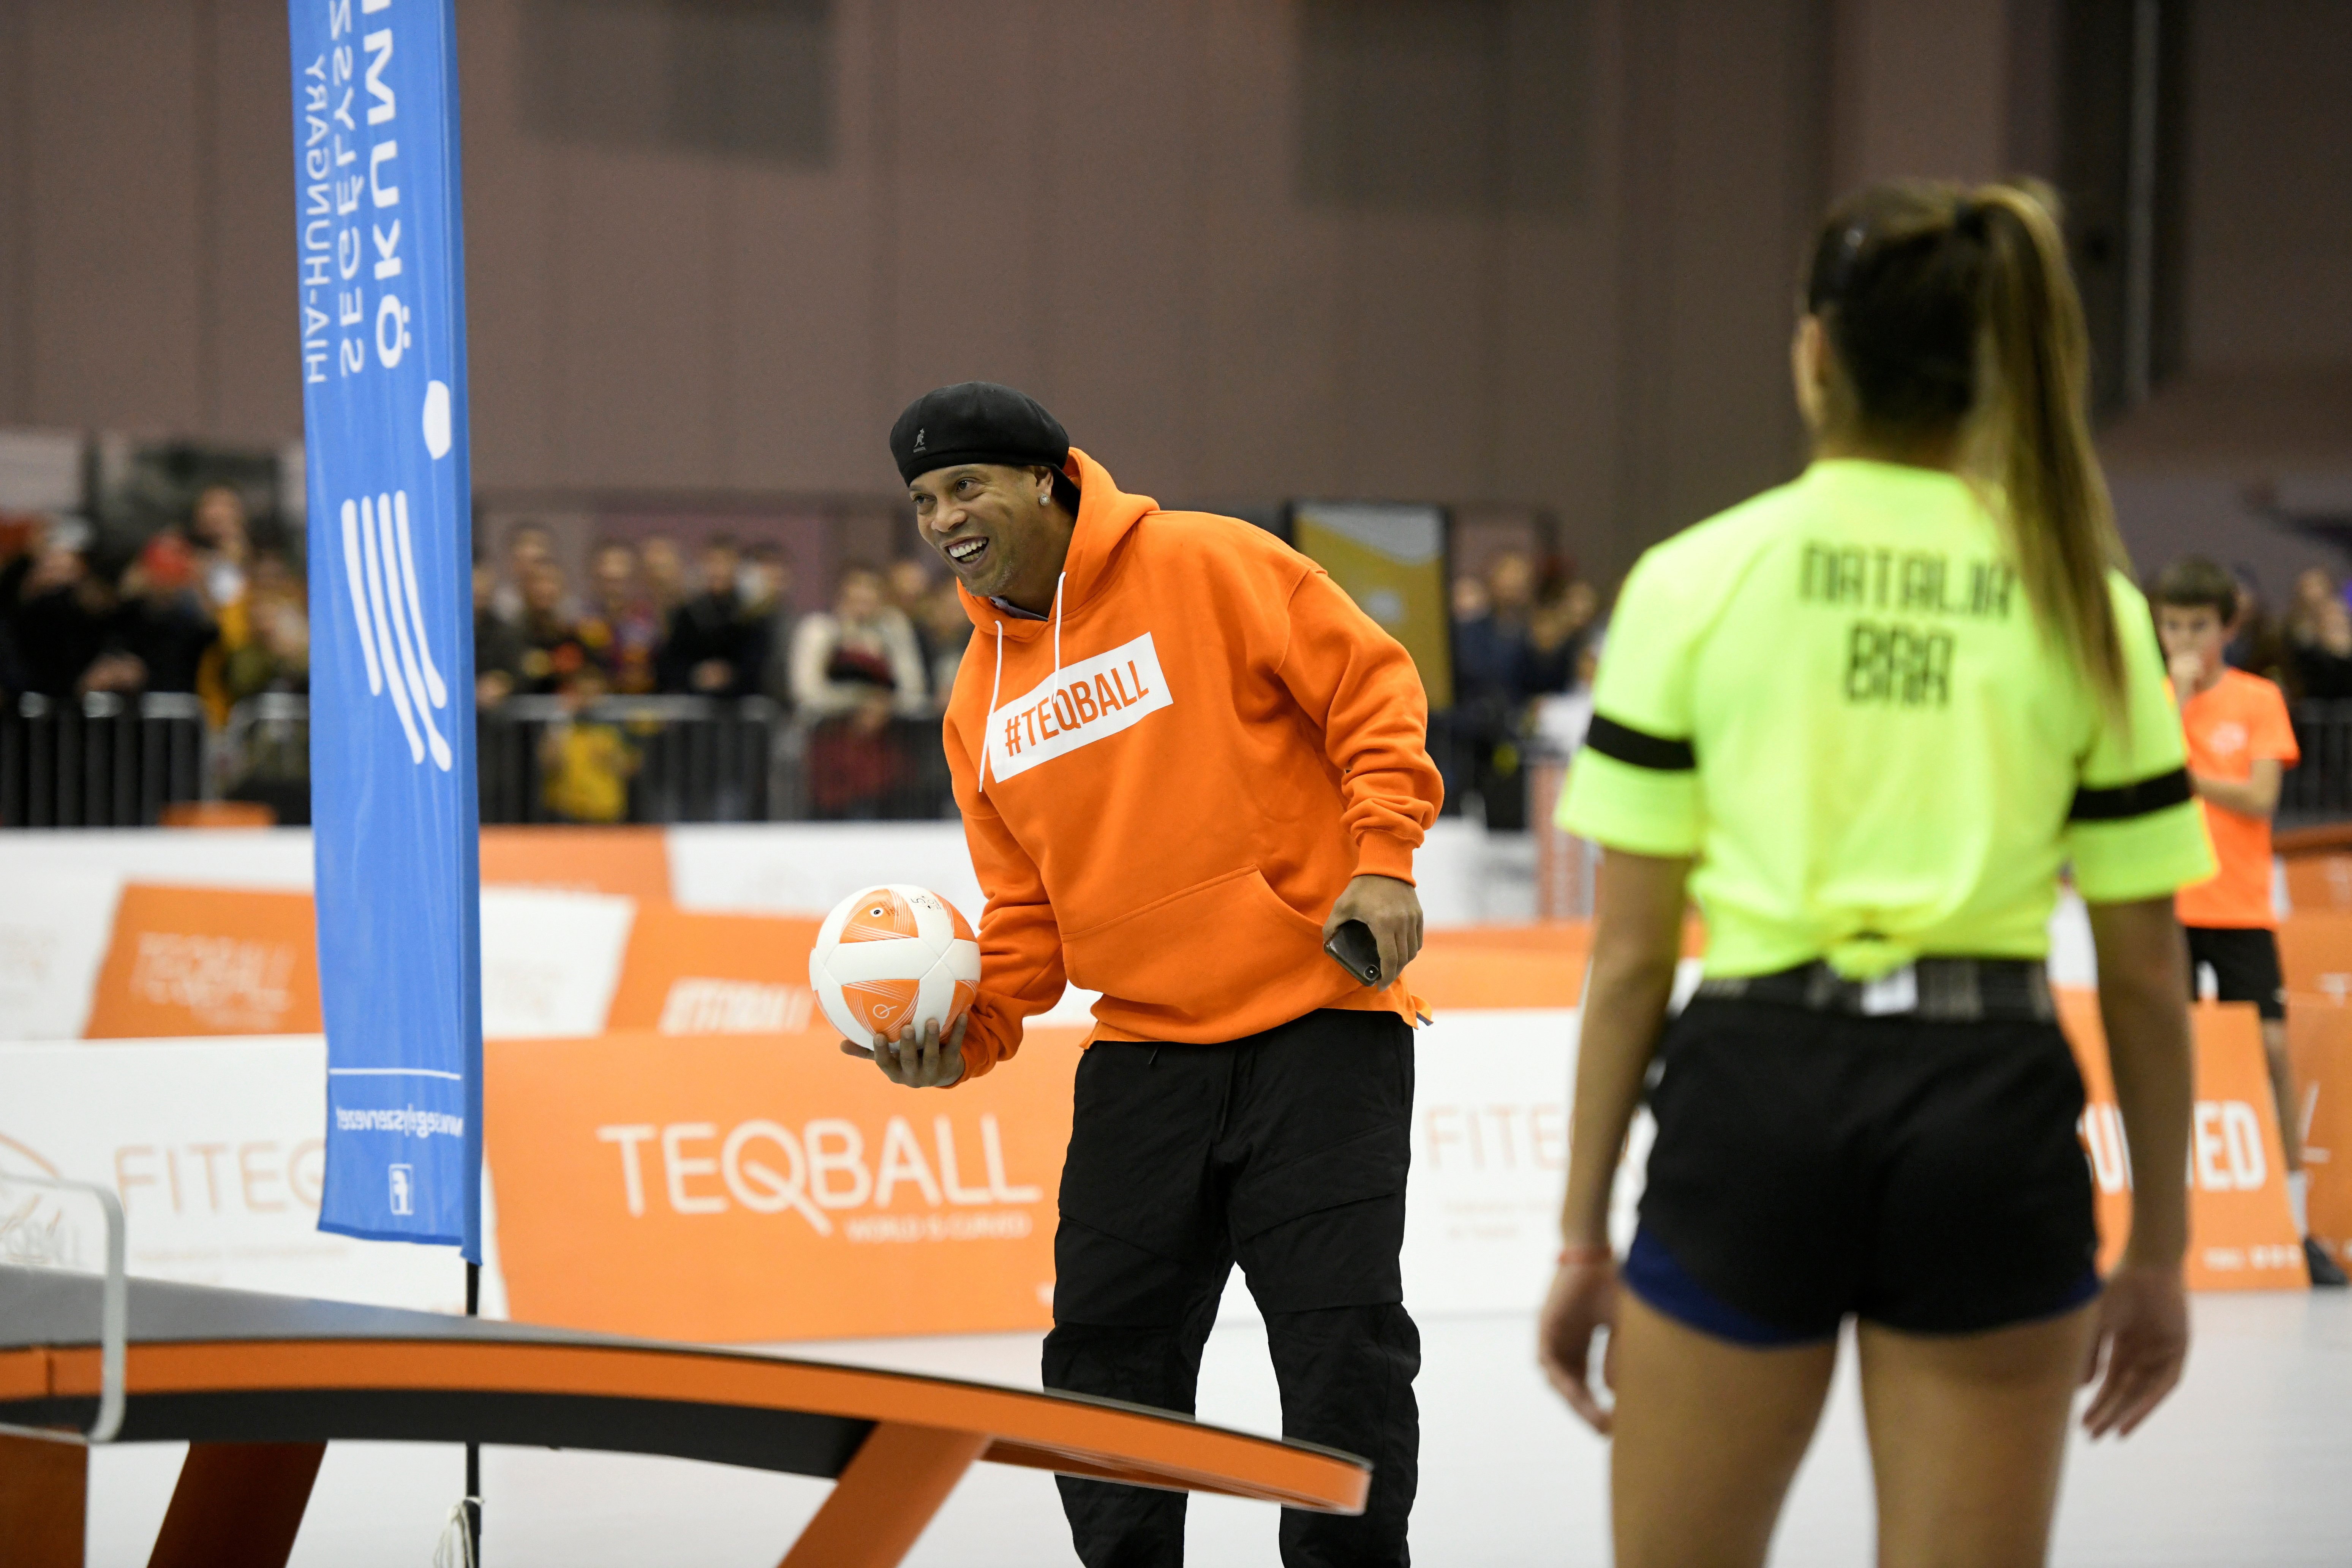 Former FIFA player of the year and football World Cup winner Ronaldinho of Brazil plays Teqball at the Teqball World Championships in Budapest, Hungary December 6, 2019. REUTERS/Tamas Kaszas